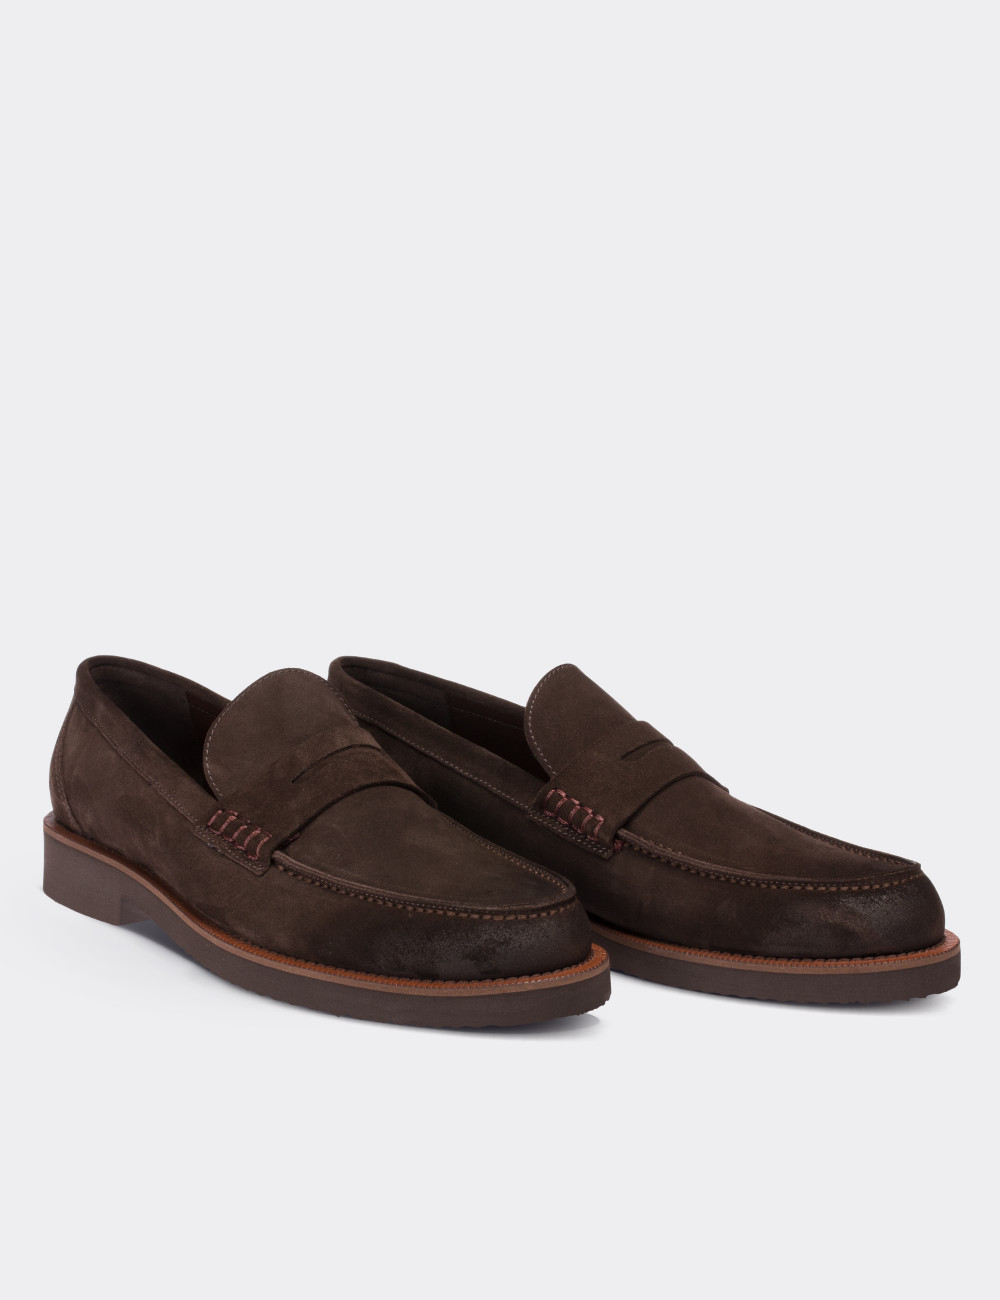 Brown Suede Leather Loafers & Moccasins Shoes - 01538MKHVE04